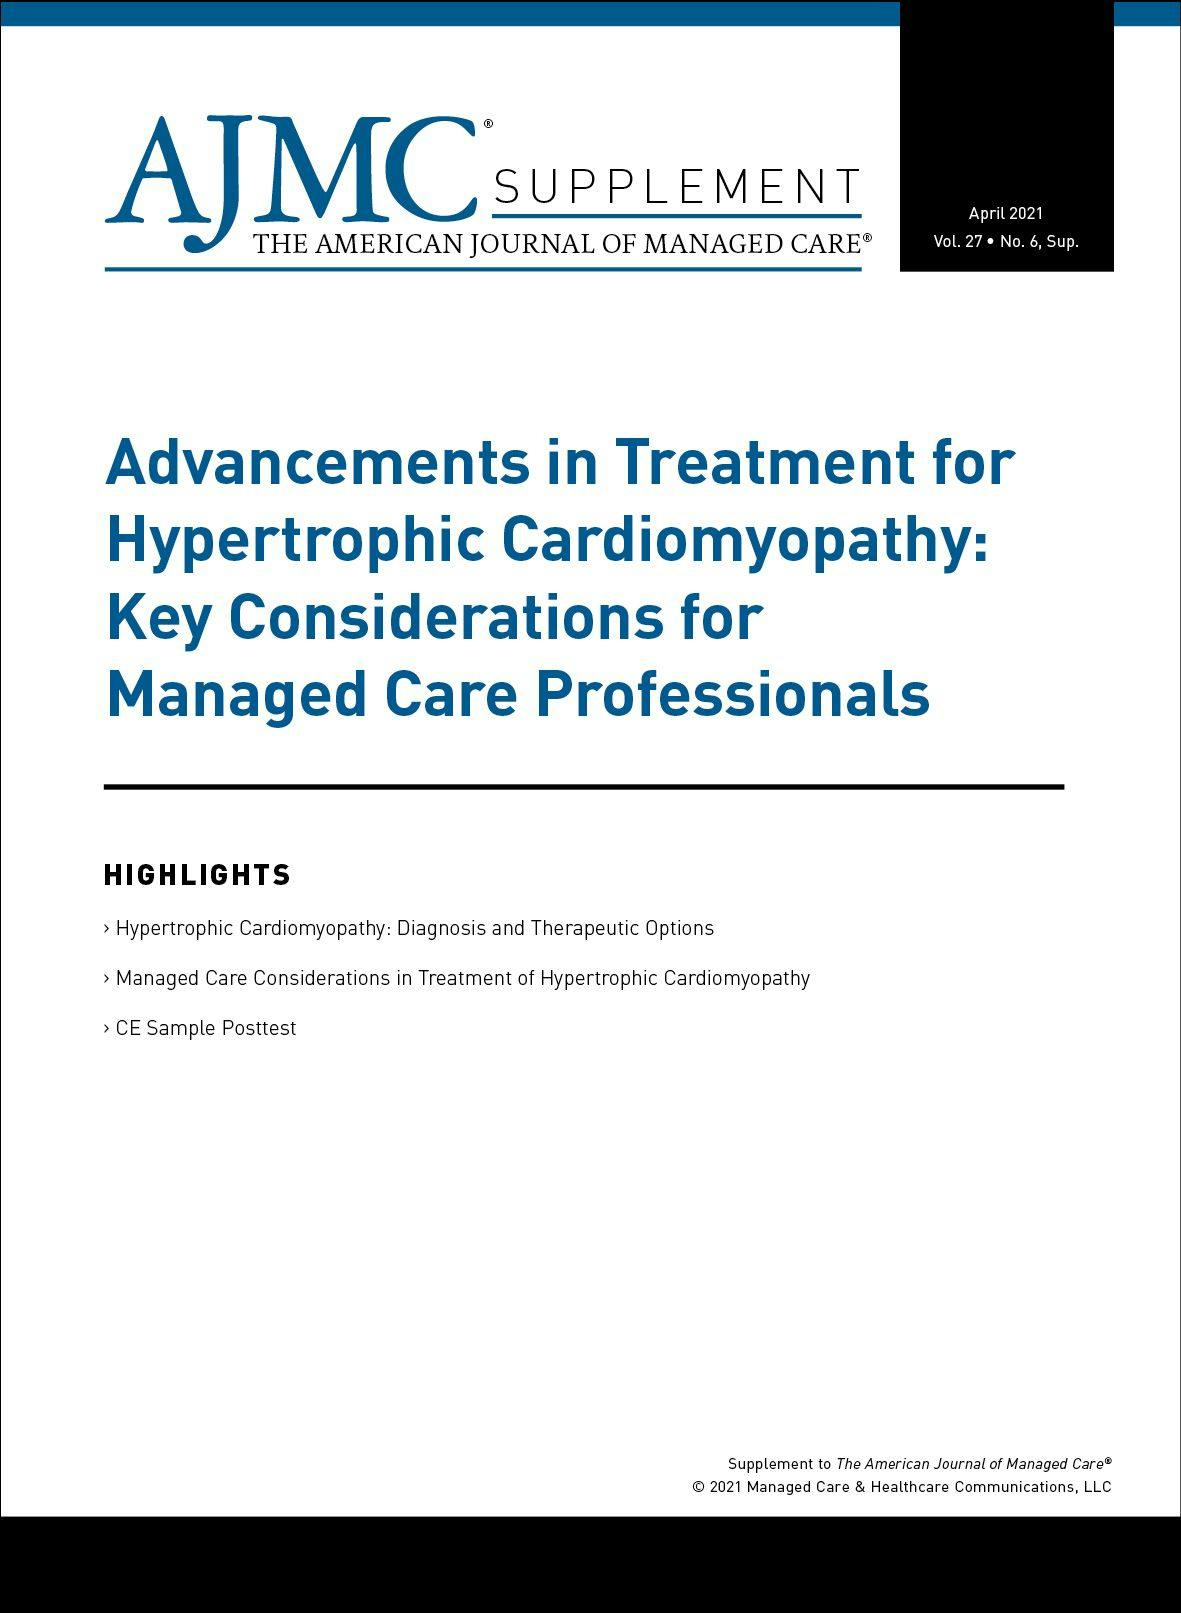 Advancements in Treatment for Hypertrophic Cardiomyopathy: Key Considerations for Managed Care Professionals